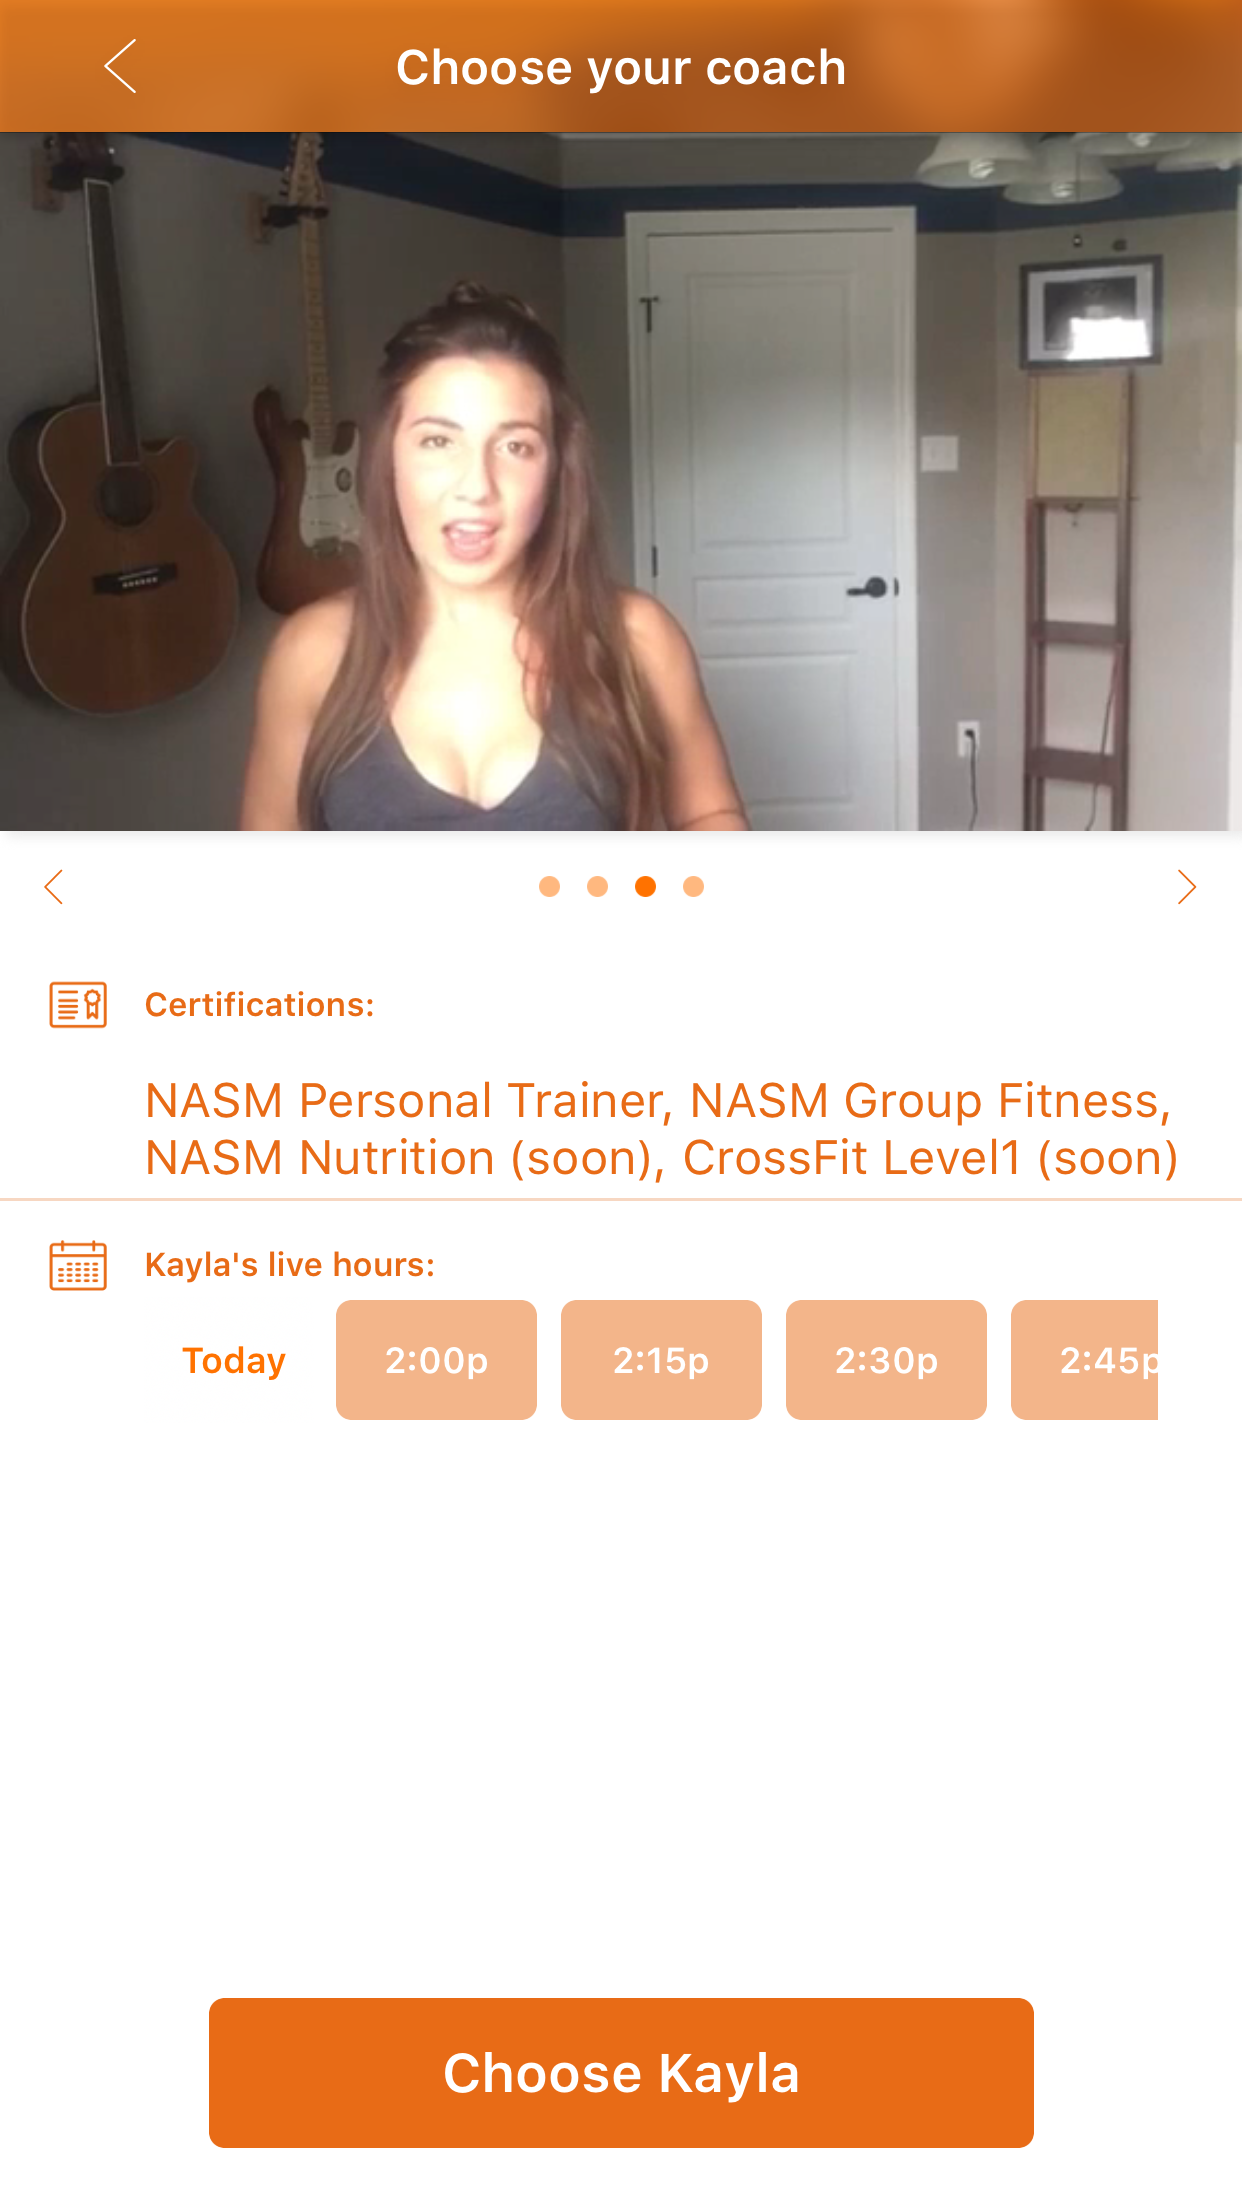 Live video calling allows clients to consult and workout live with a certified personal trainer.